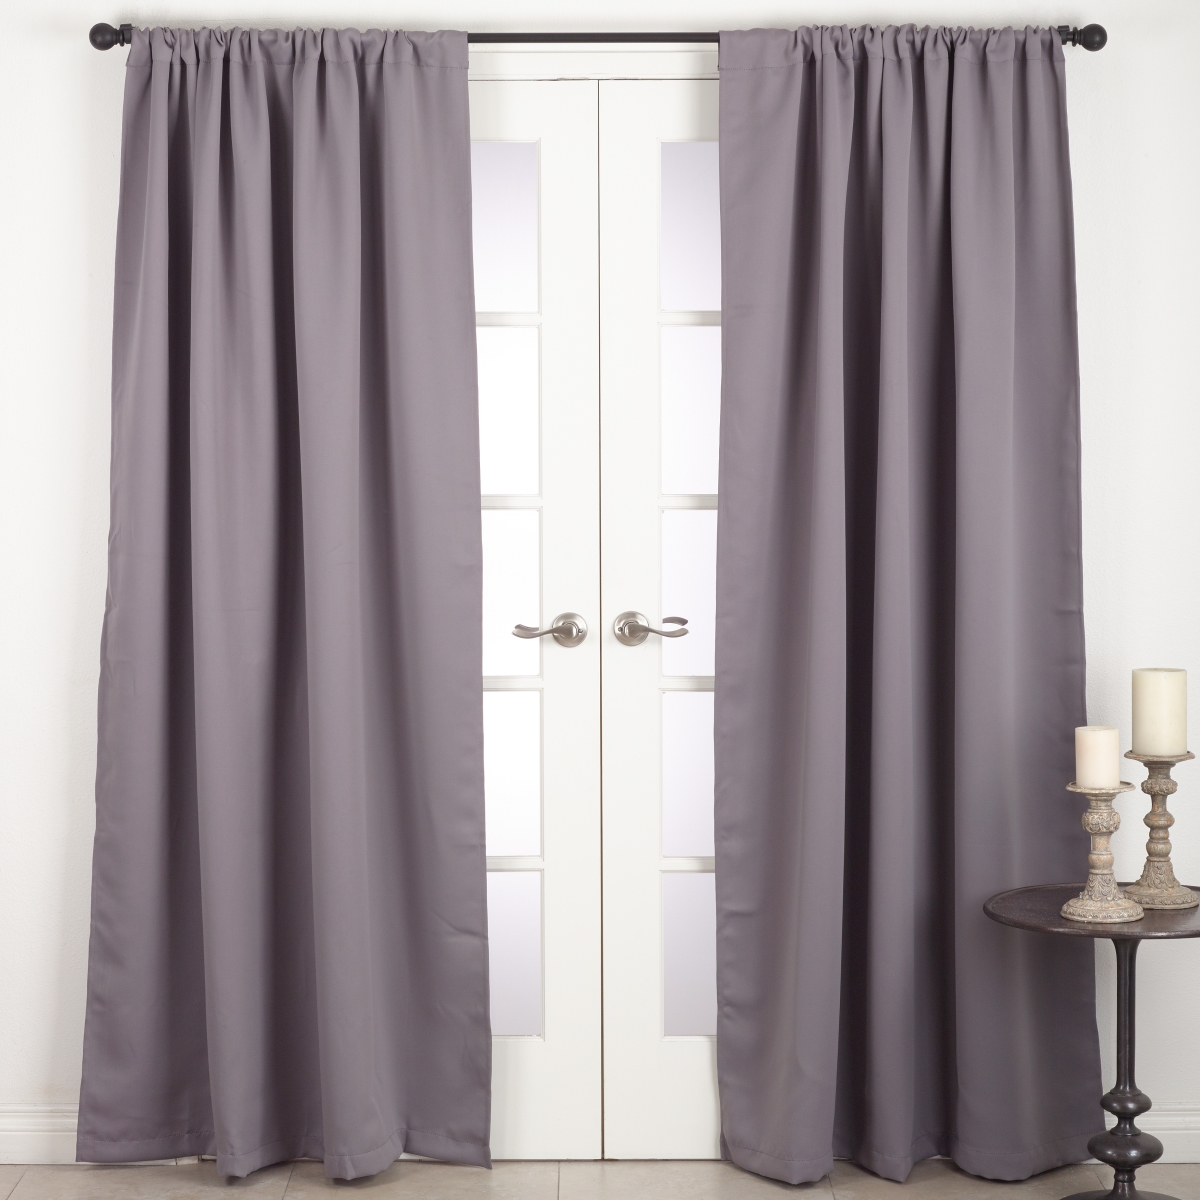 C115.gy5496 54 X 96 In. Solid Rod Pocket Blackout Window Curtain Panel, Grey